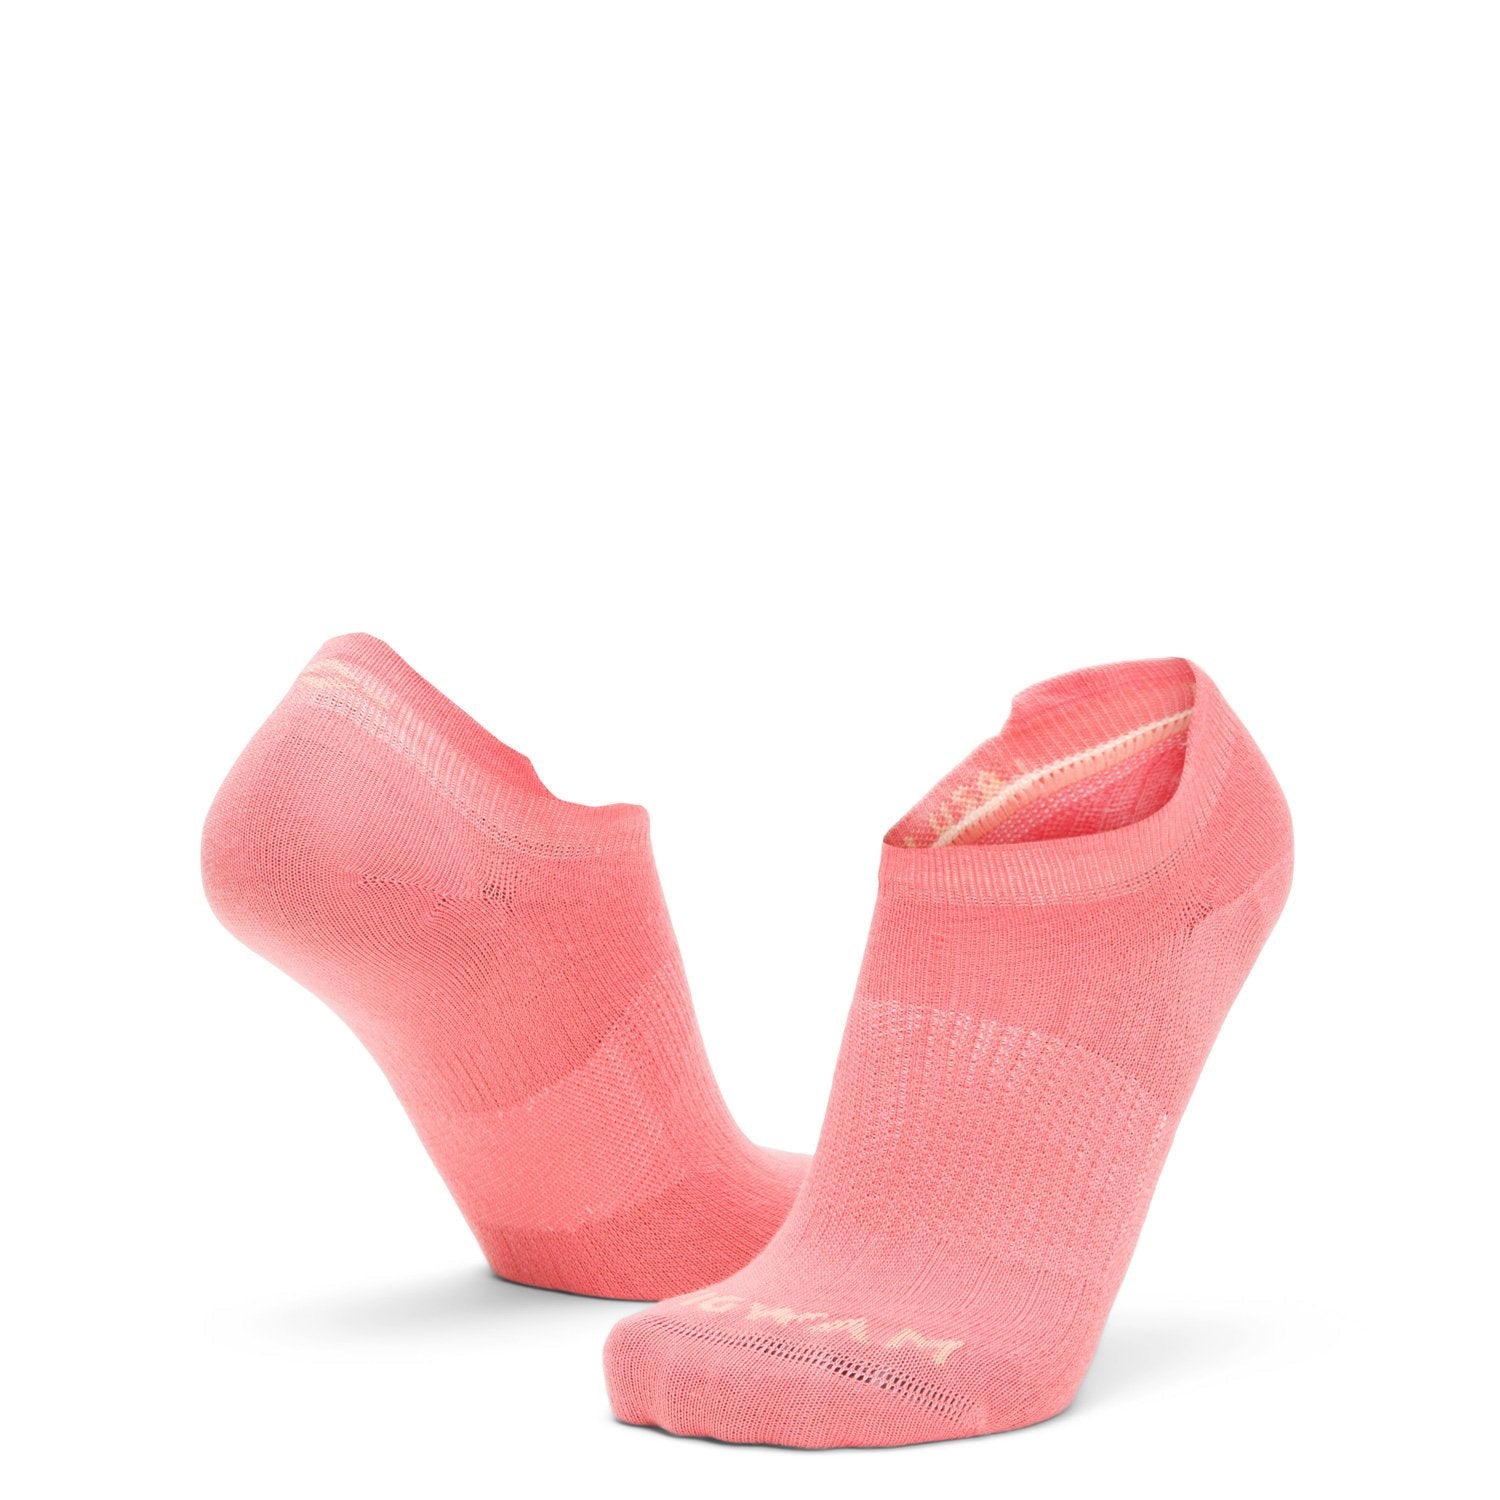 Catalyst Ultra-lightweight Low Cut Sock - Sugar Coral full product perspective - made in The USA Wigwam Socks